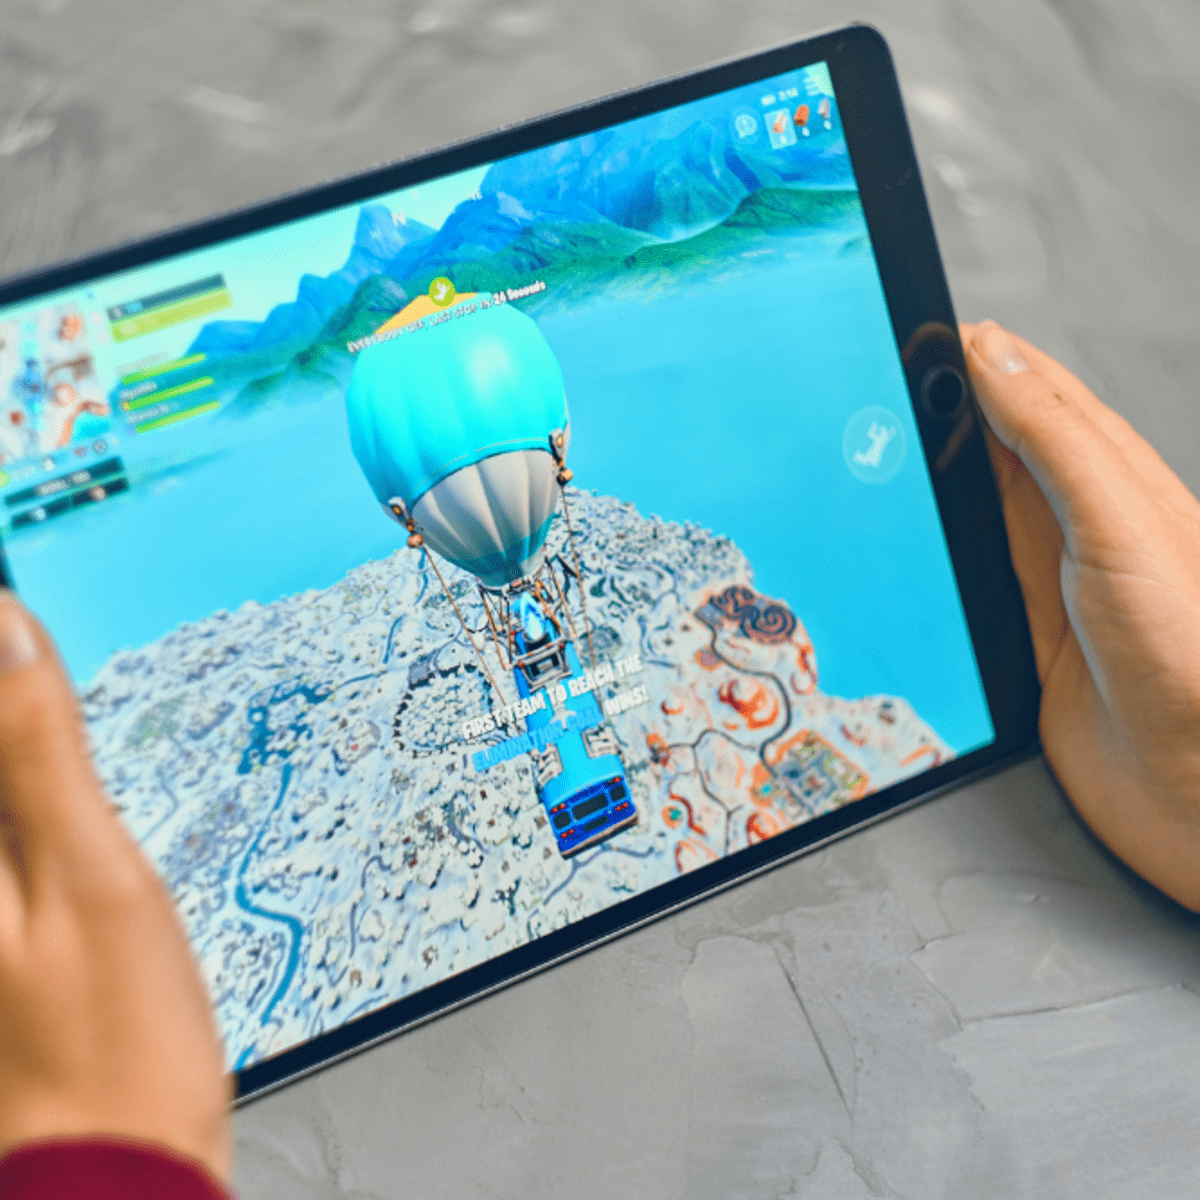 2021 Apple 10.2-Inch iPad Review: The Best Value Tablet Yet? - HubPages